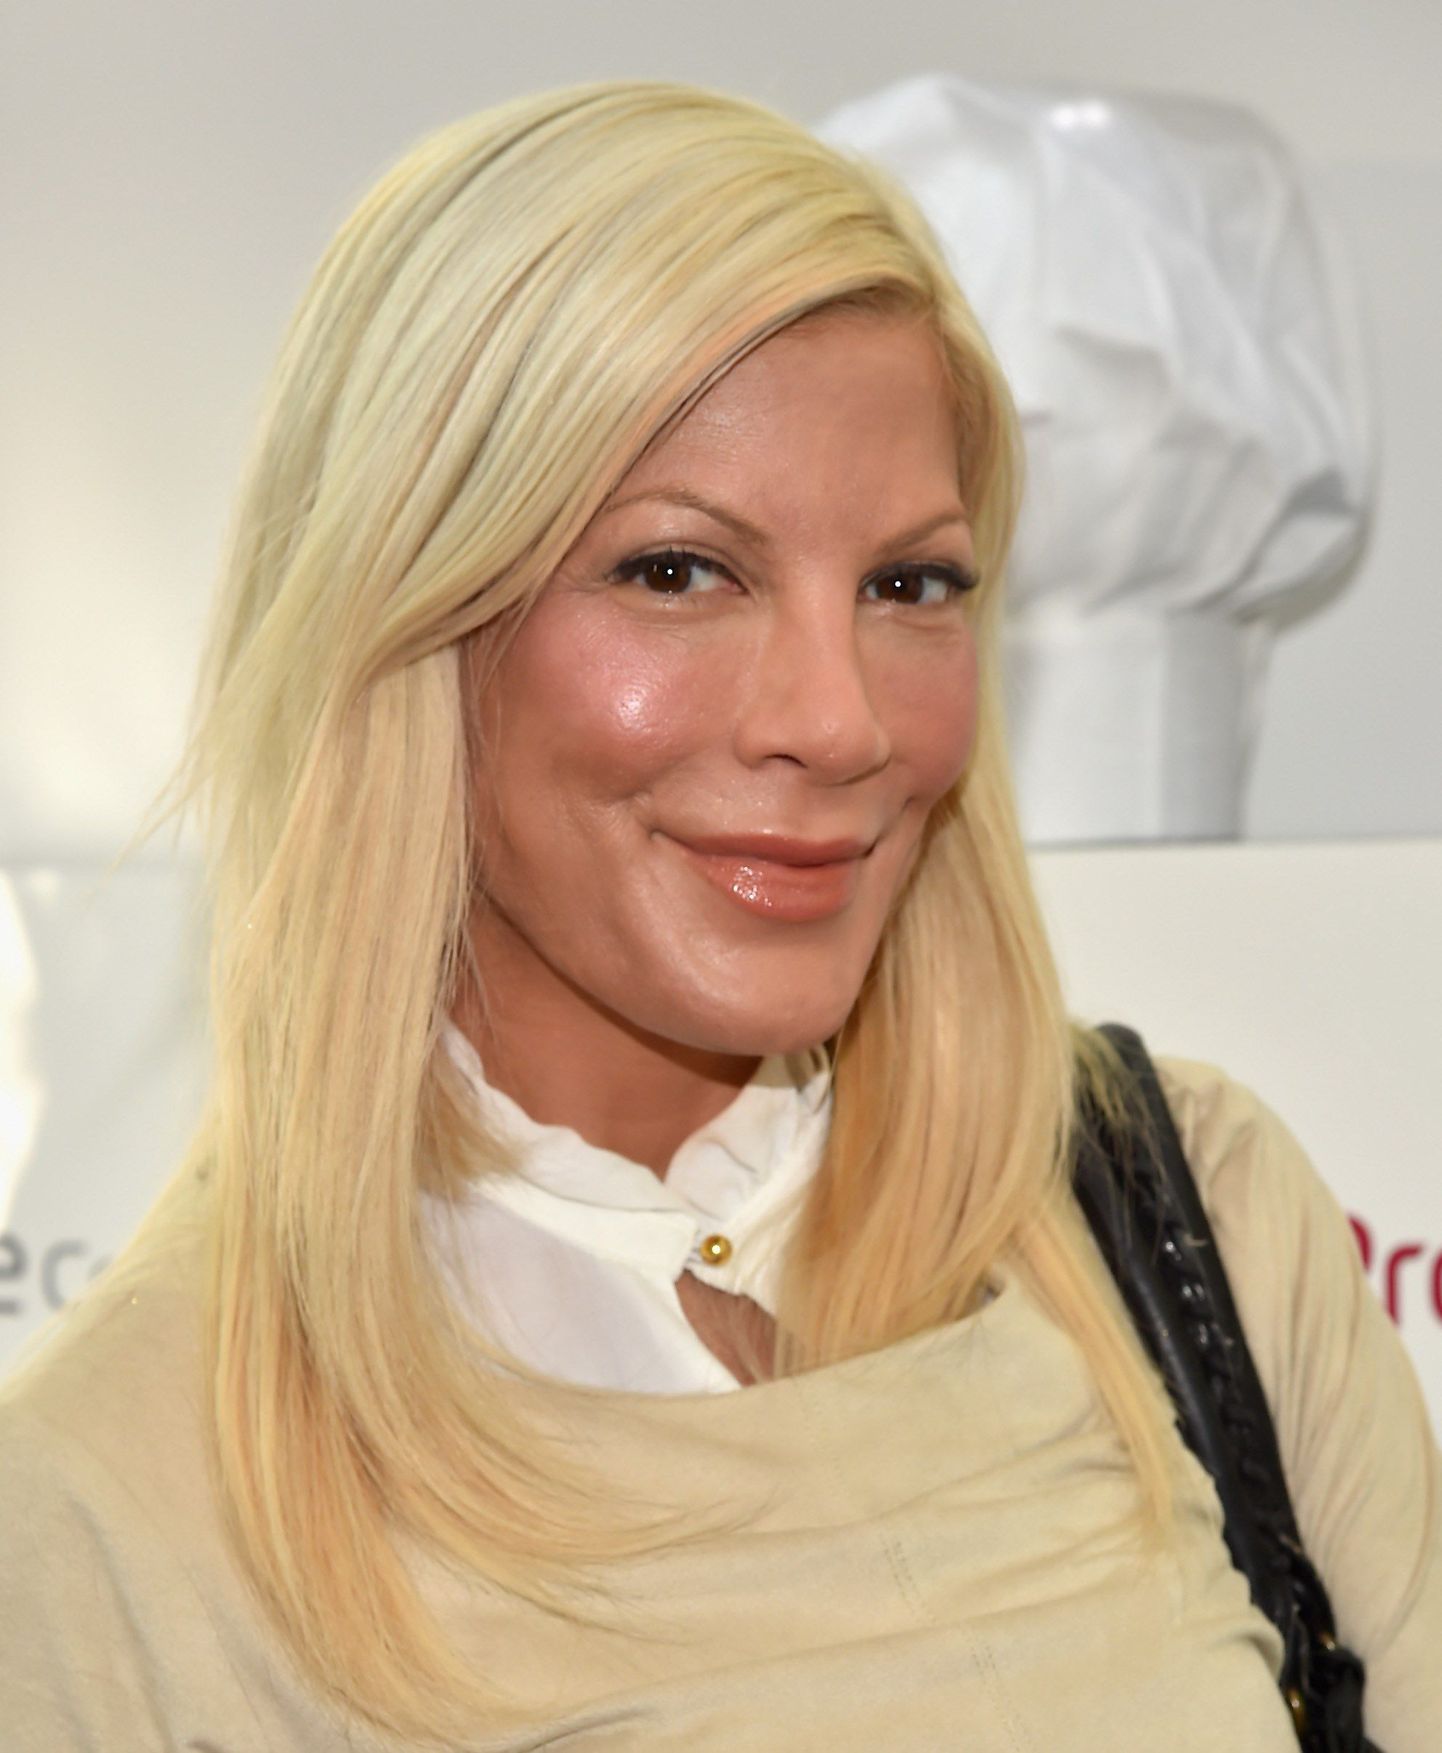 CULVER CITY, CA - AUGUST 22: Actress Tori Spelling attends Eva Longoria and LG Electronics Host "Fam To Table" Series at The Washbow on August 22, 2015 in Culver City, California.   Alberto E. Rodriguez/Getty Images/AFP
== FOR NEWSPAPERS, INTERNET, TELCOS & TELEVISION USE ONLY ==